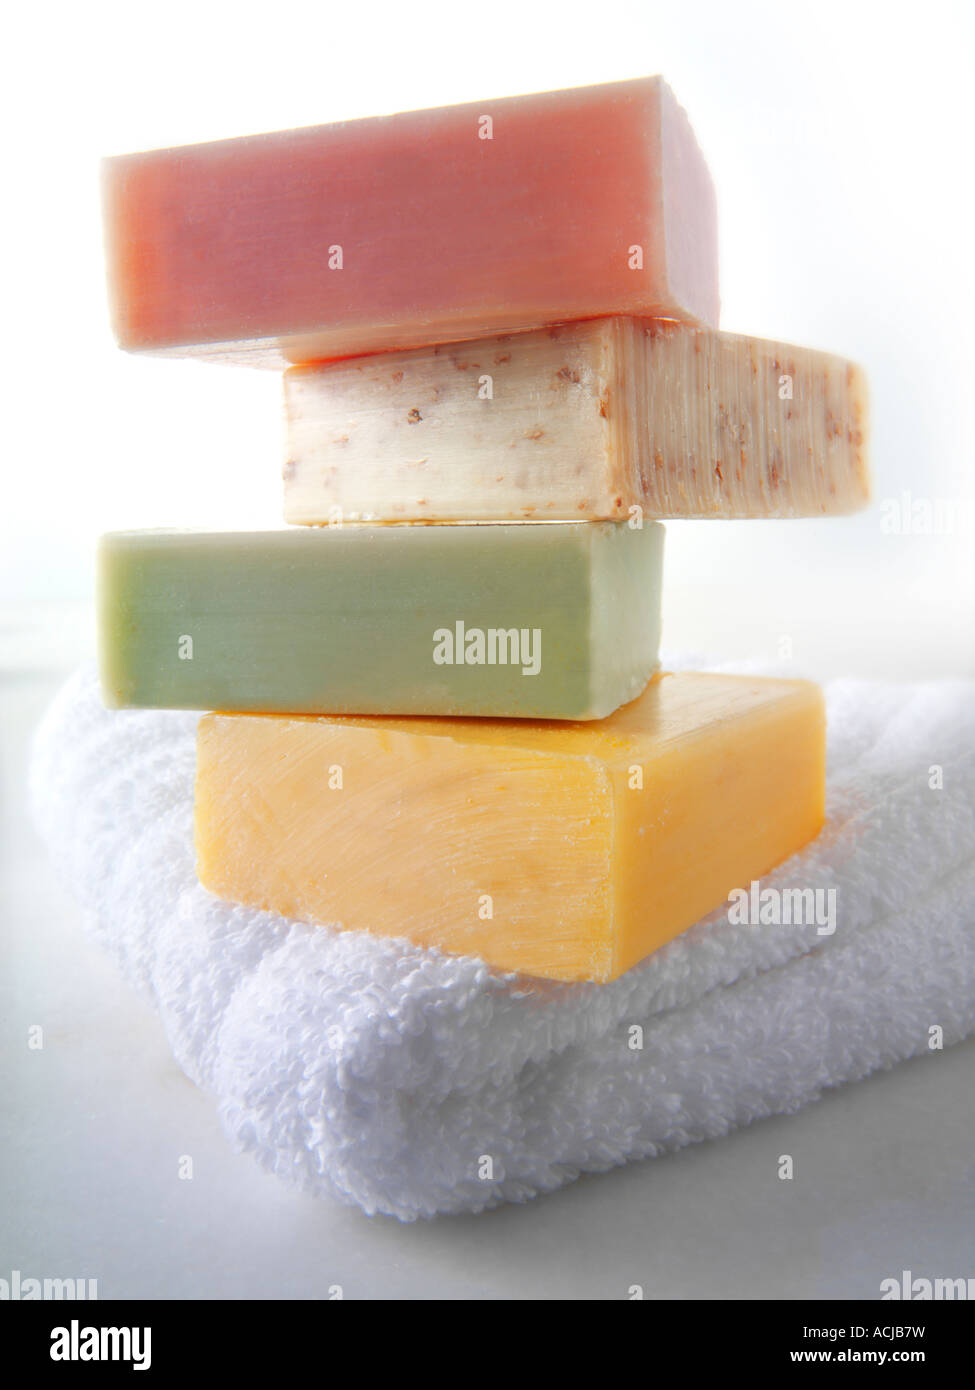 4 bars of hand made natural scented soap bars piled up on a white face towel Stock Photo